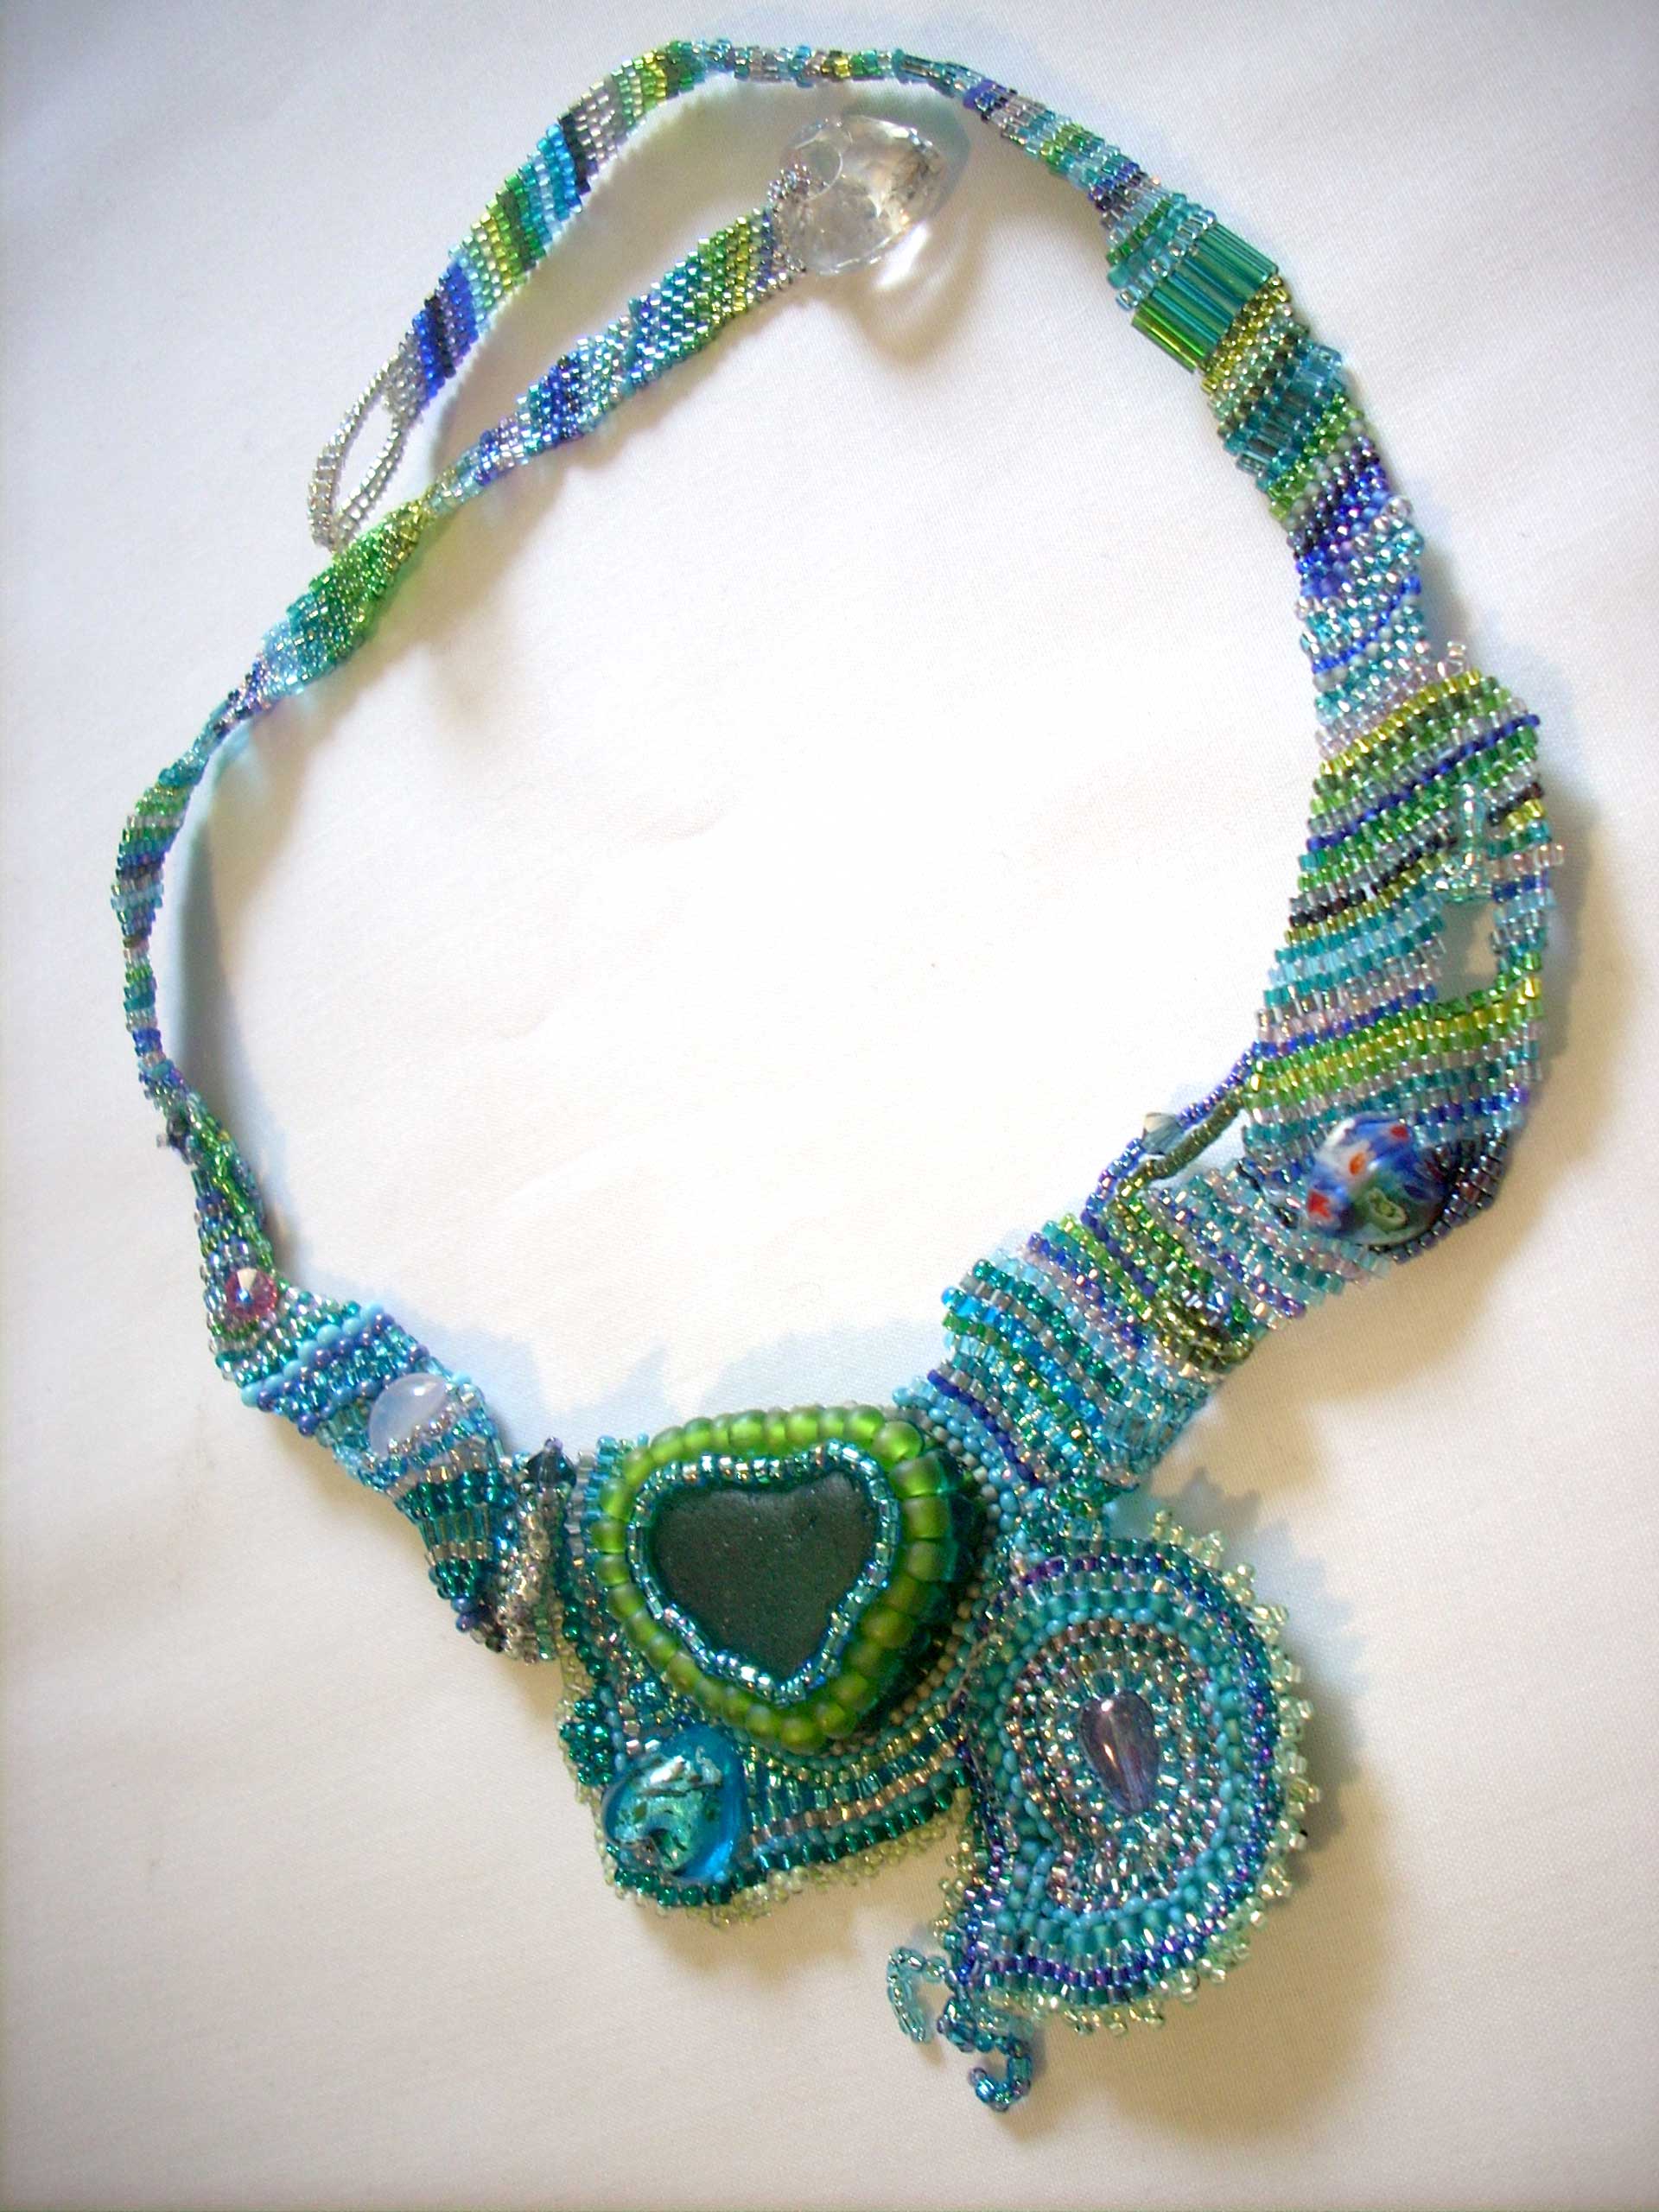 baroque handmade necklace with deep green heart of sea glass surrounded by seed beads in greens and blues